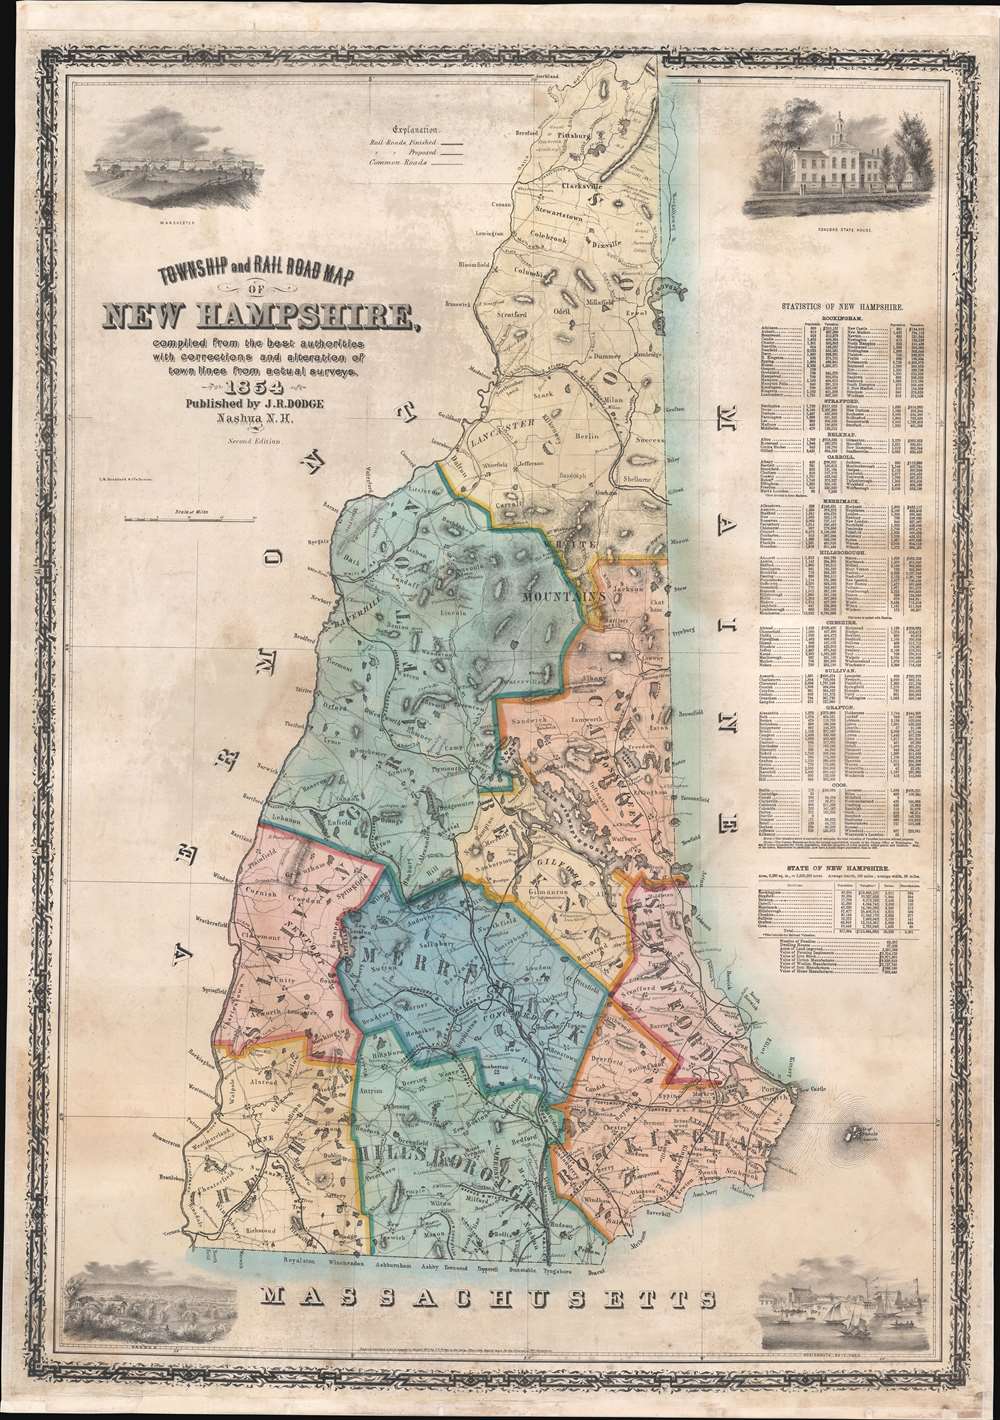 Township and Rail Road Map of New Hampshire, compiled from the best authorities with corrections and alteration of town lines from actual surveys. 1854. - Main View